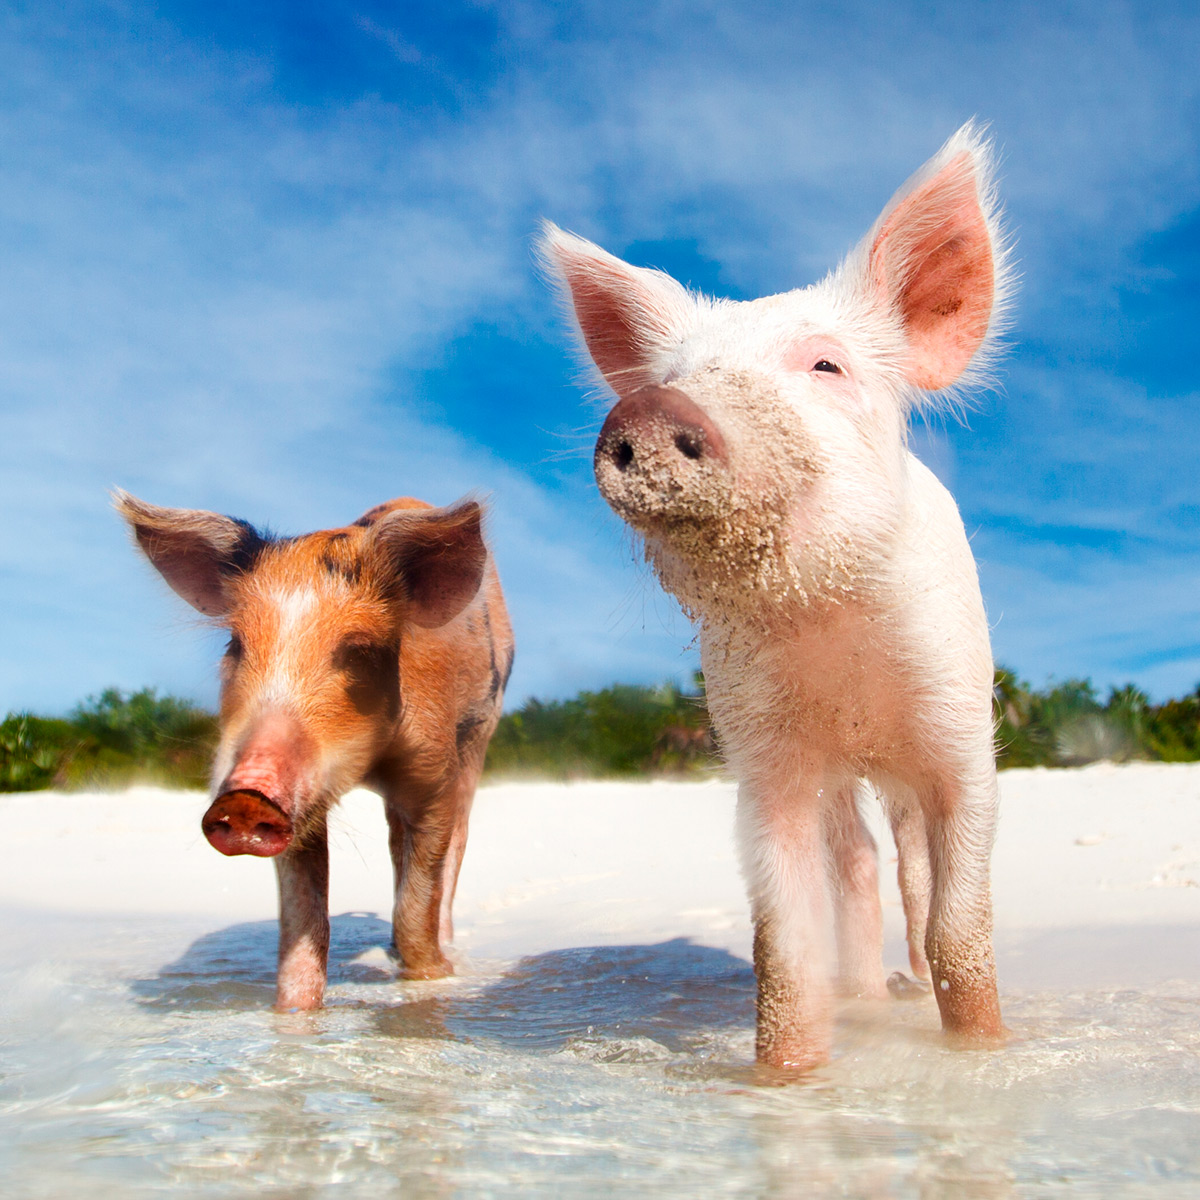 two pigs on a sandy beach